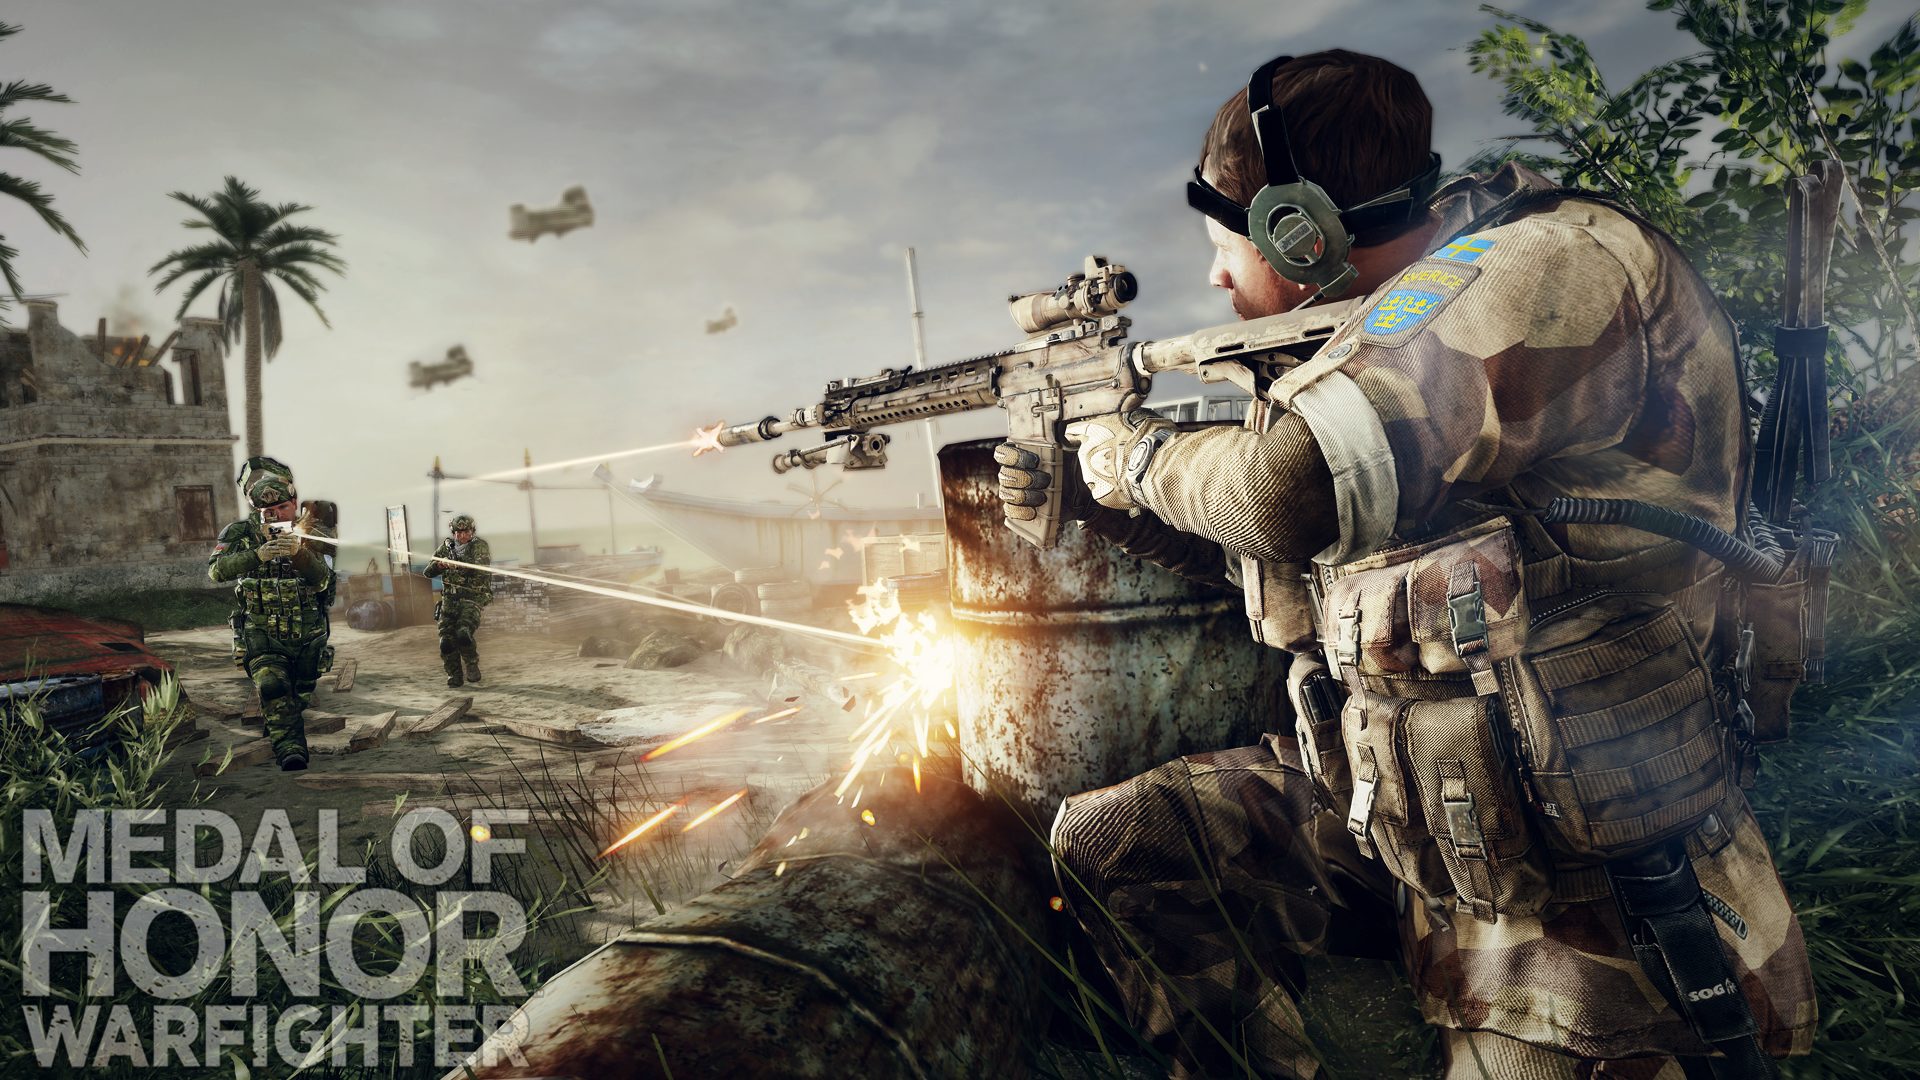 Medal Of Honor Warfighter ميدل اوف هونر وار فايتر